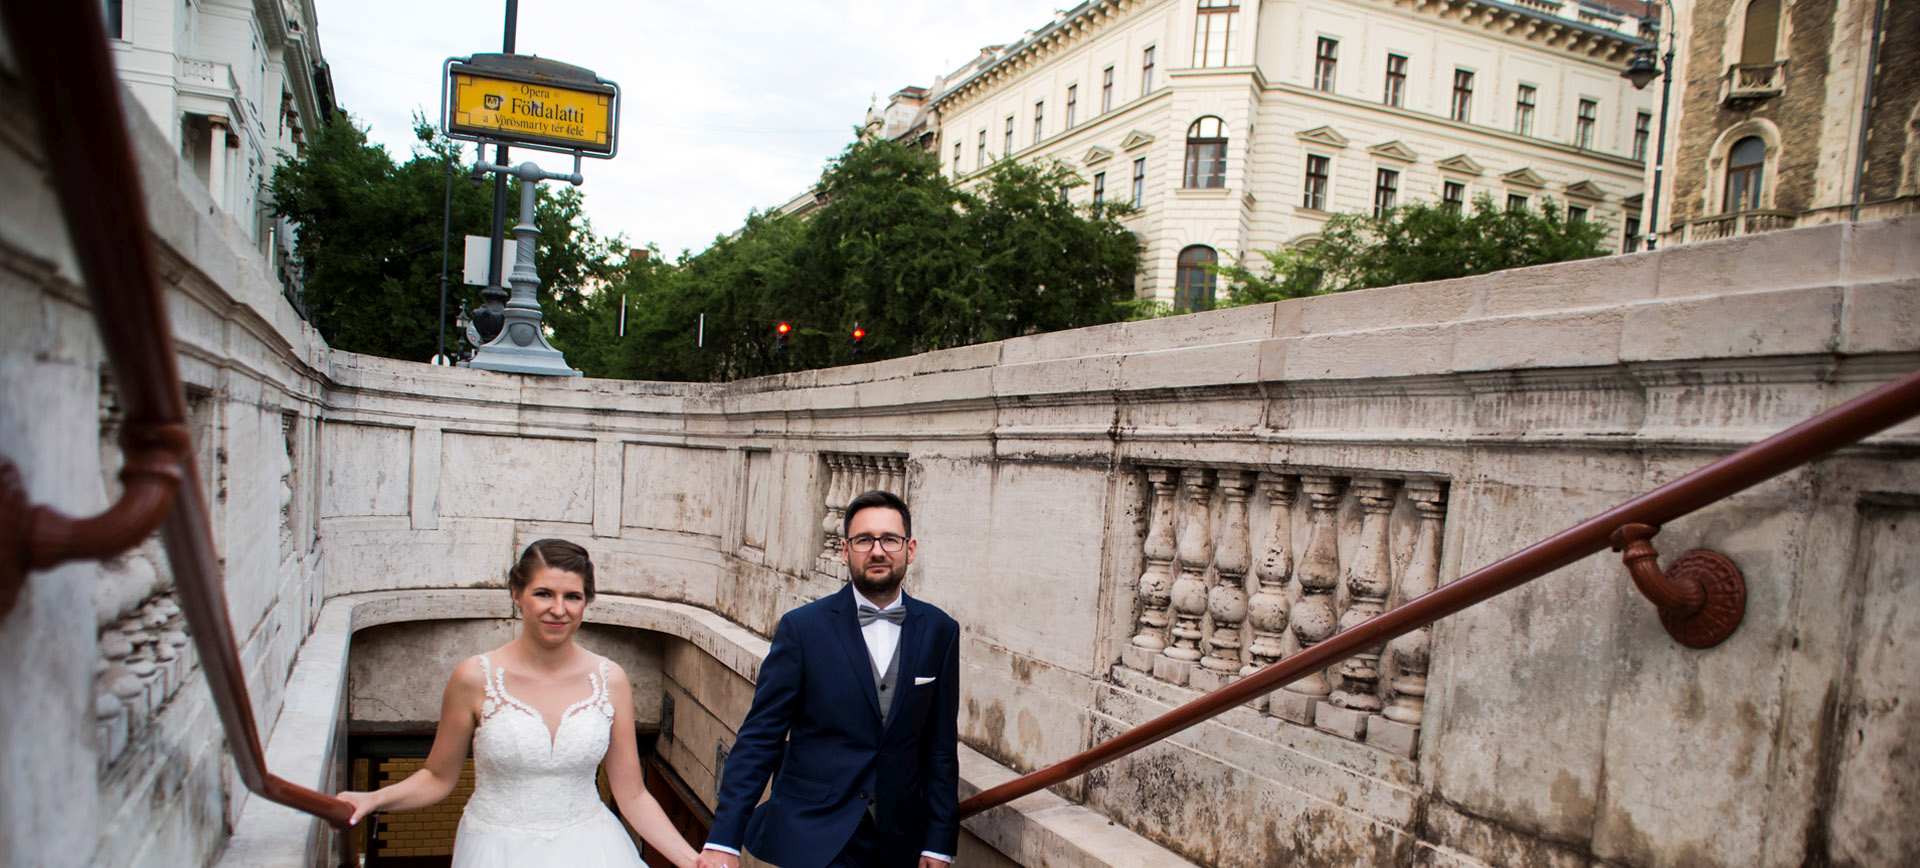 budapest elopement wedding package hungary